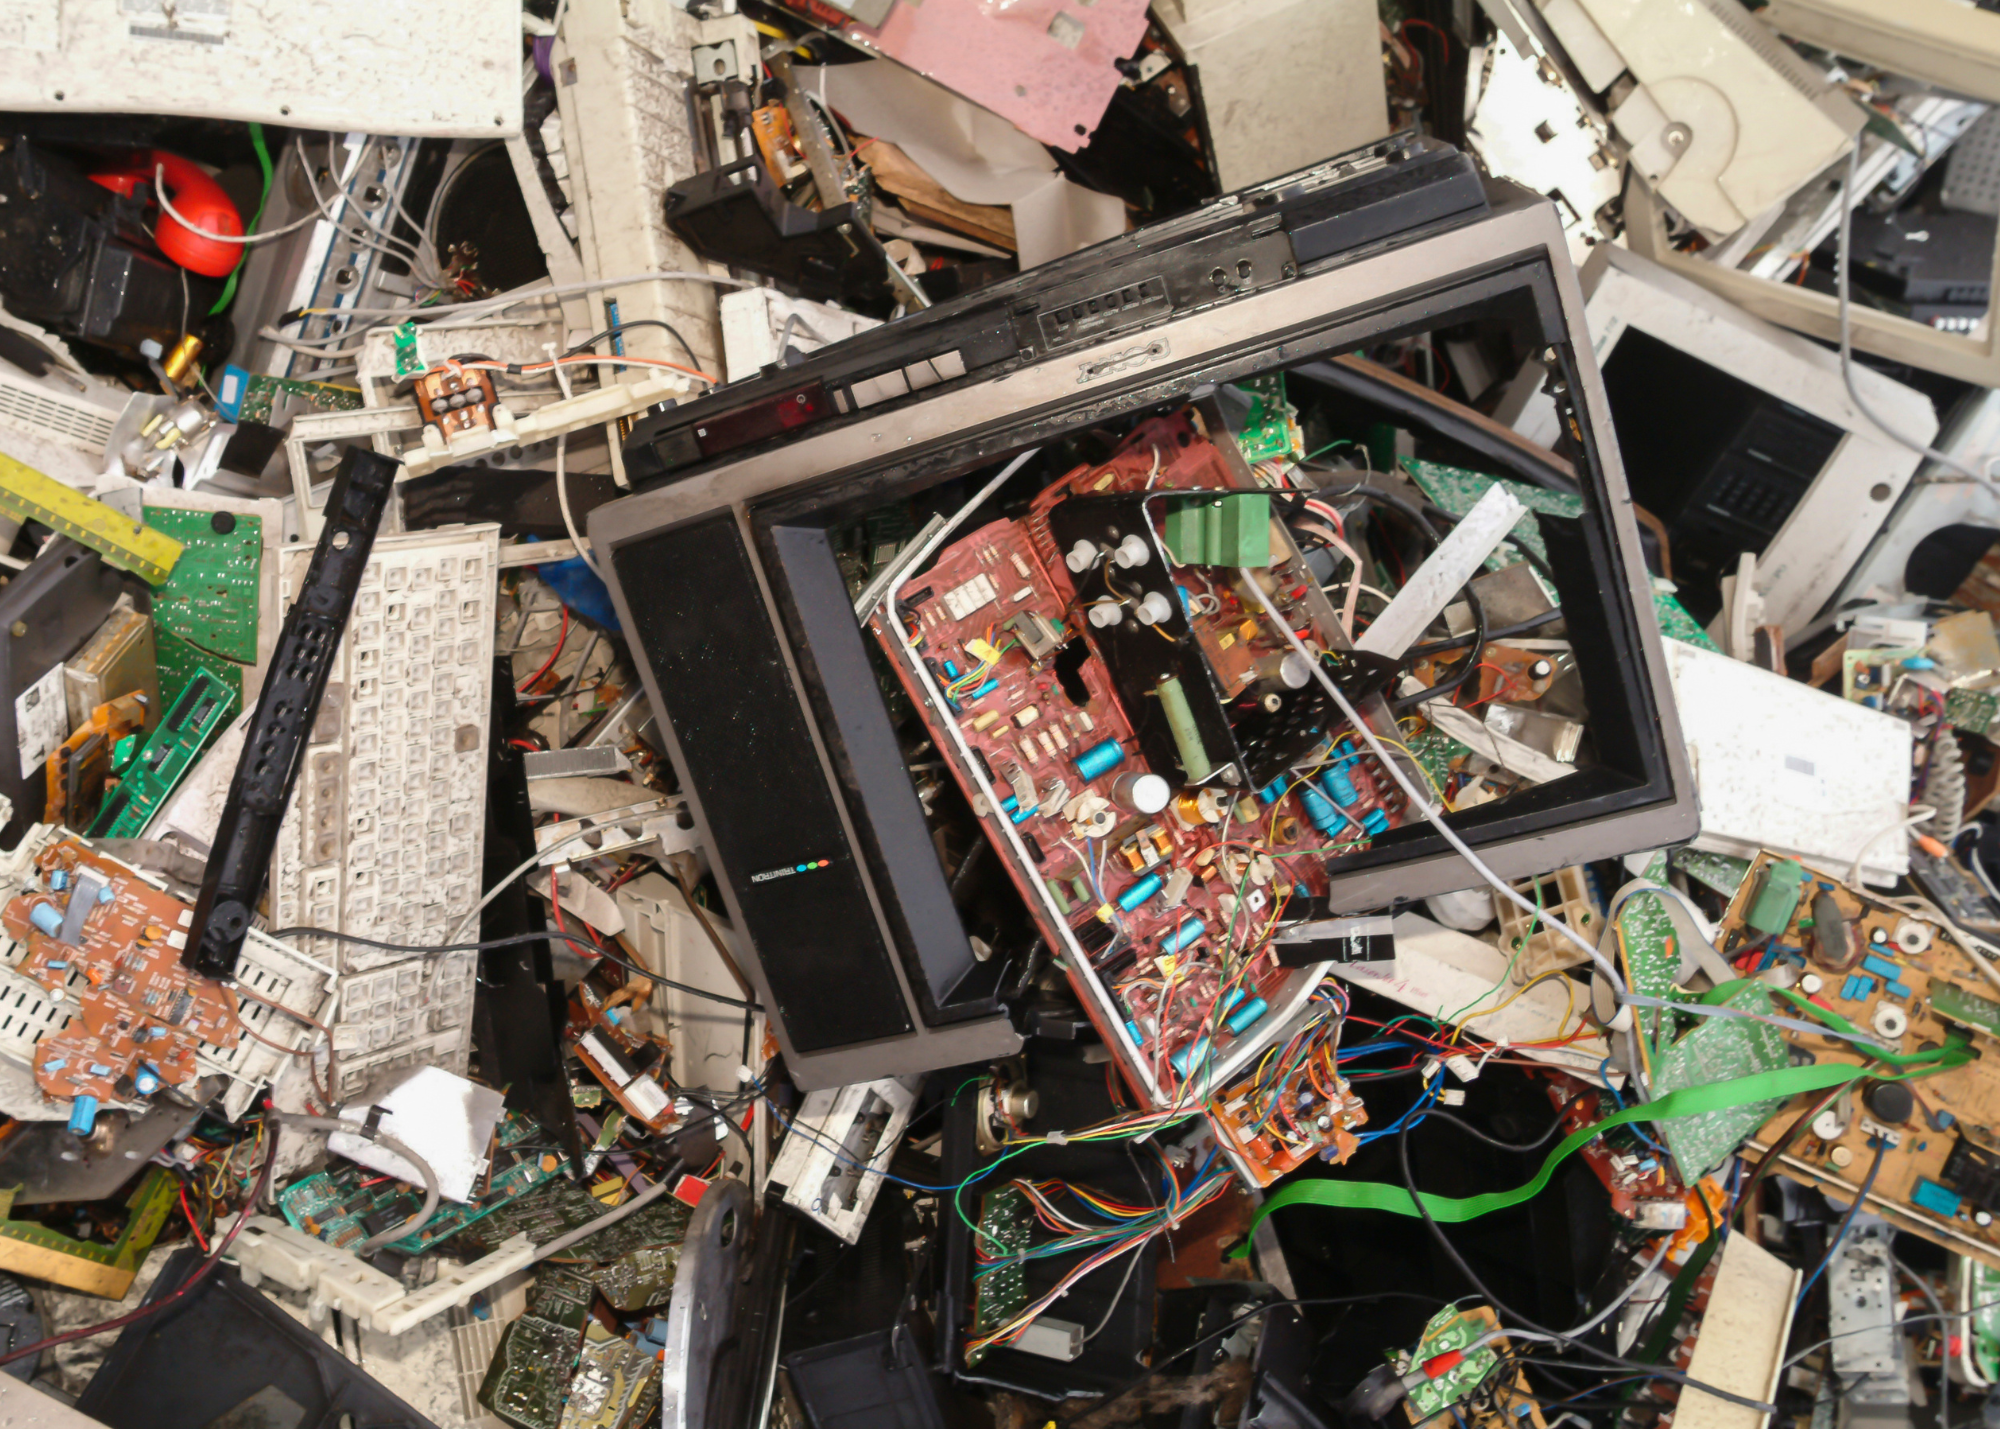 photos of old mother boards, wires, and discarded electronics